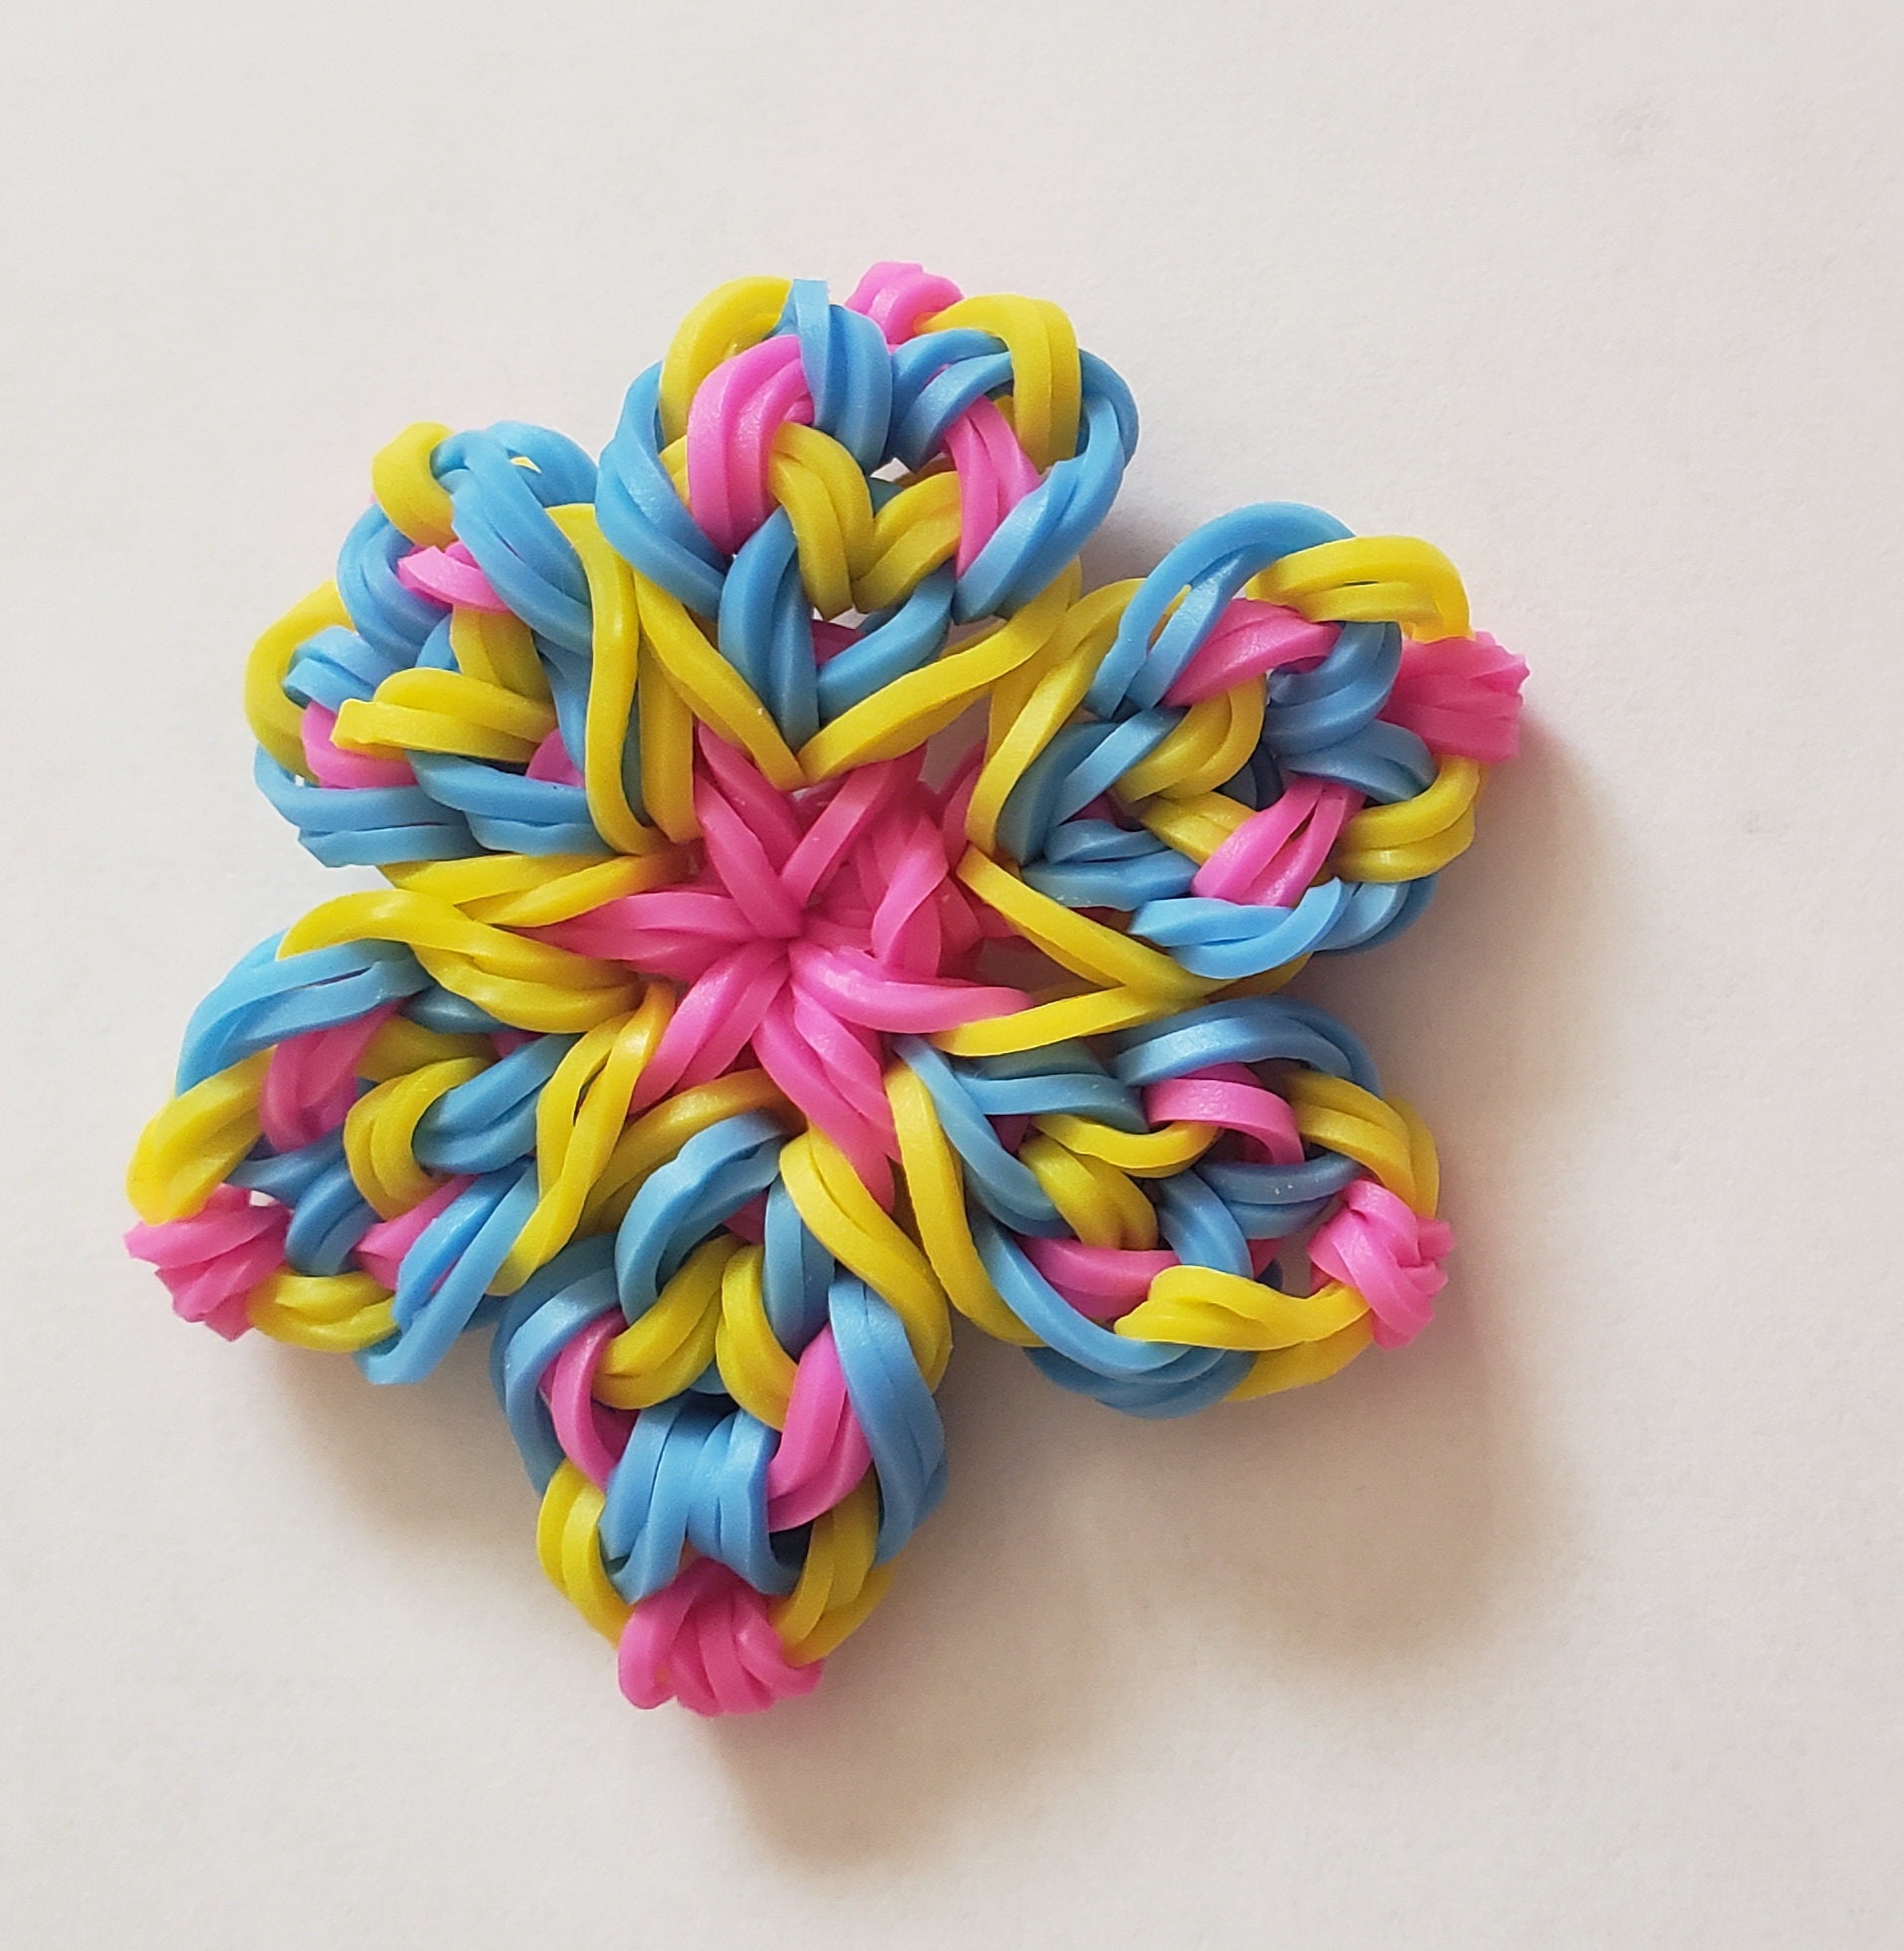 LGBTQ+ Pride Flags Inspired Rainbow Loom Flower Charms - Also Available As A Keychain!